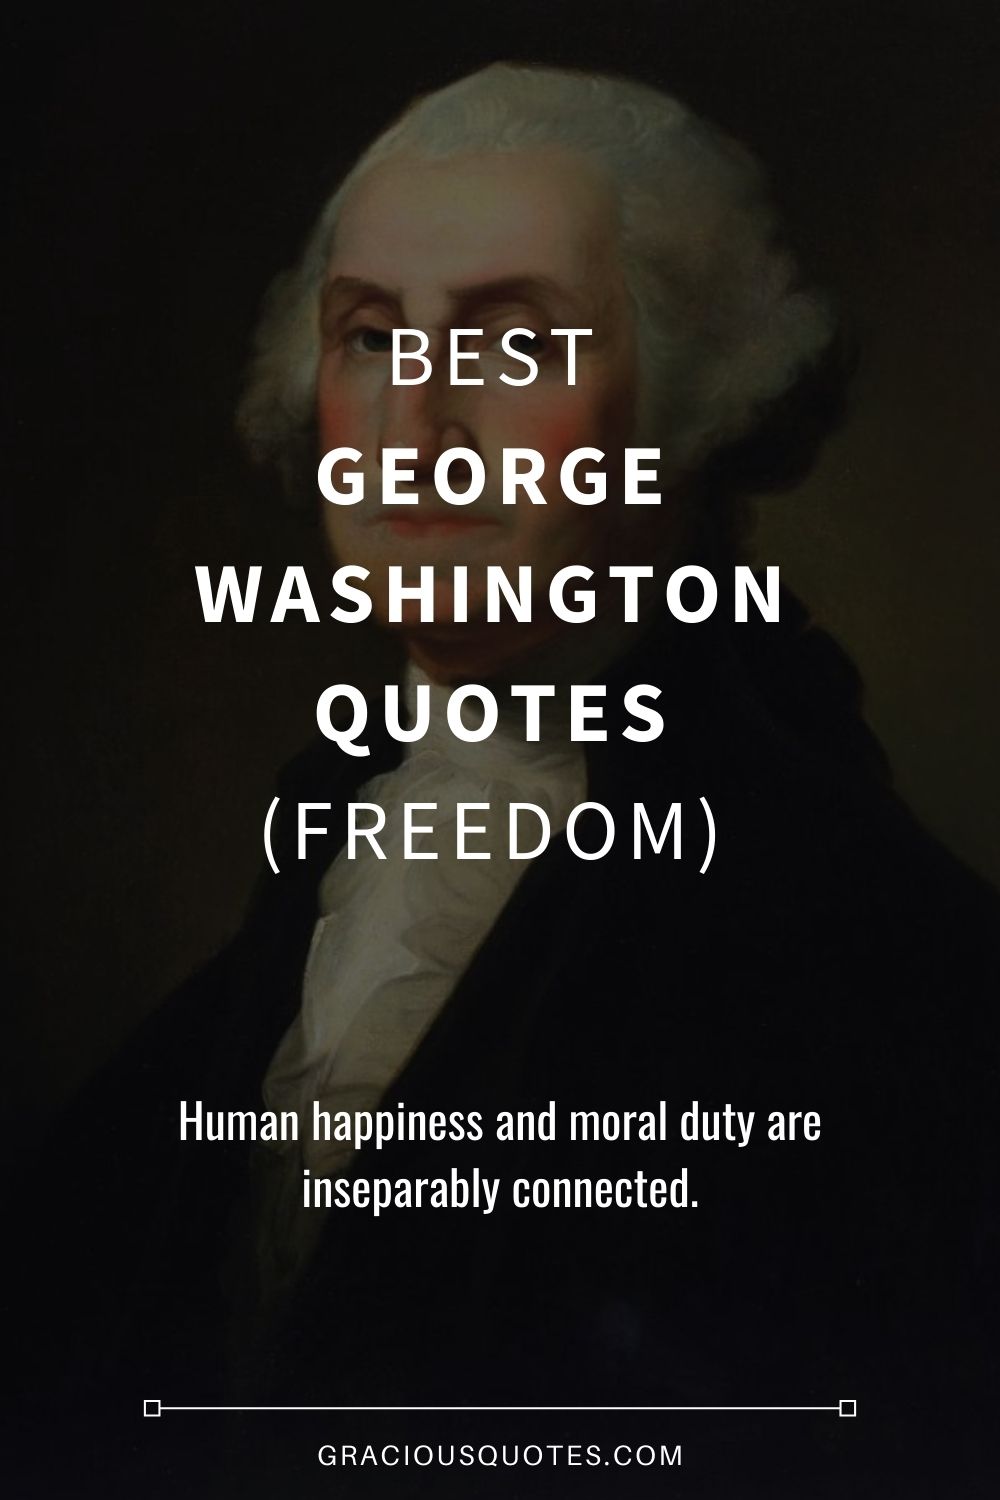 Best George Washington Quotes (FREEDOM) - Gracious Quotes